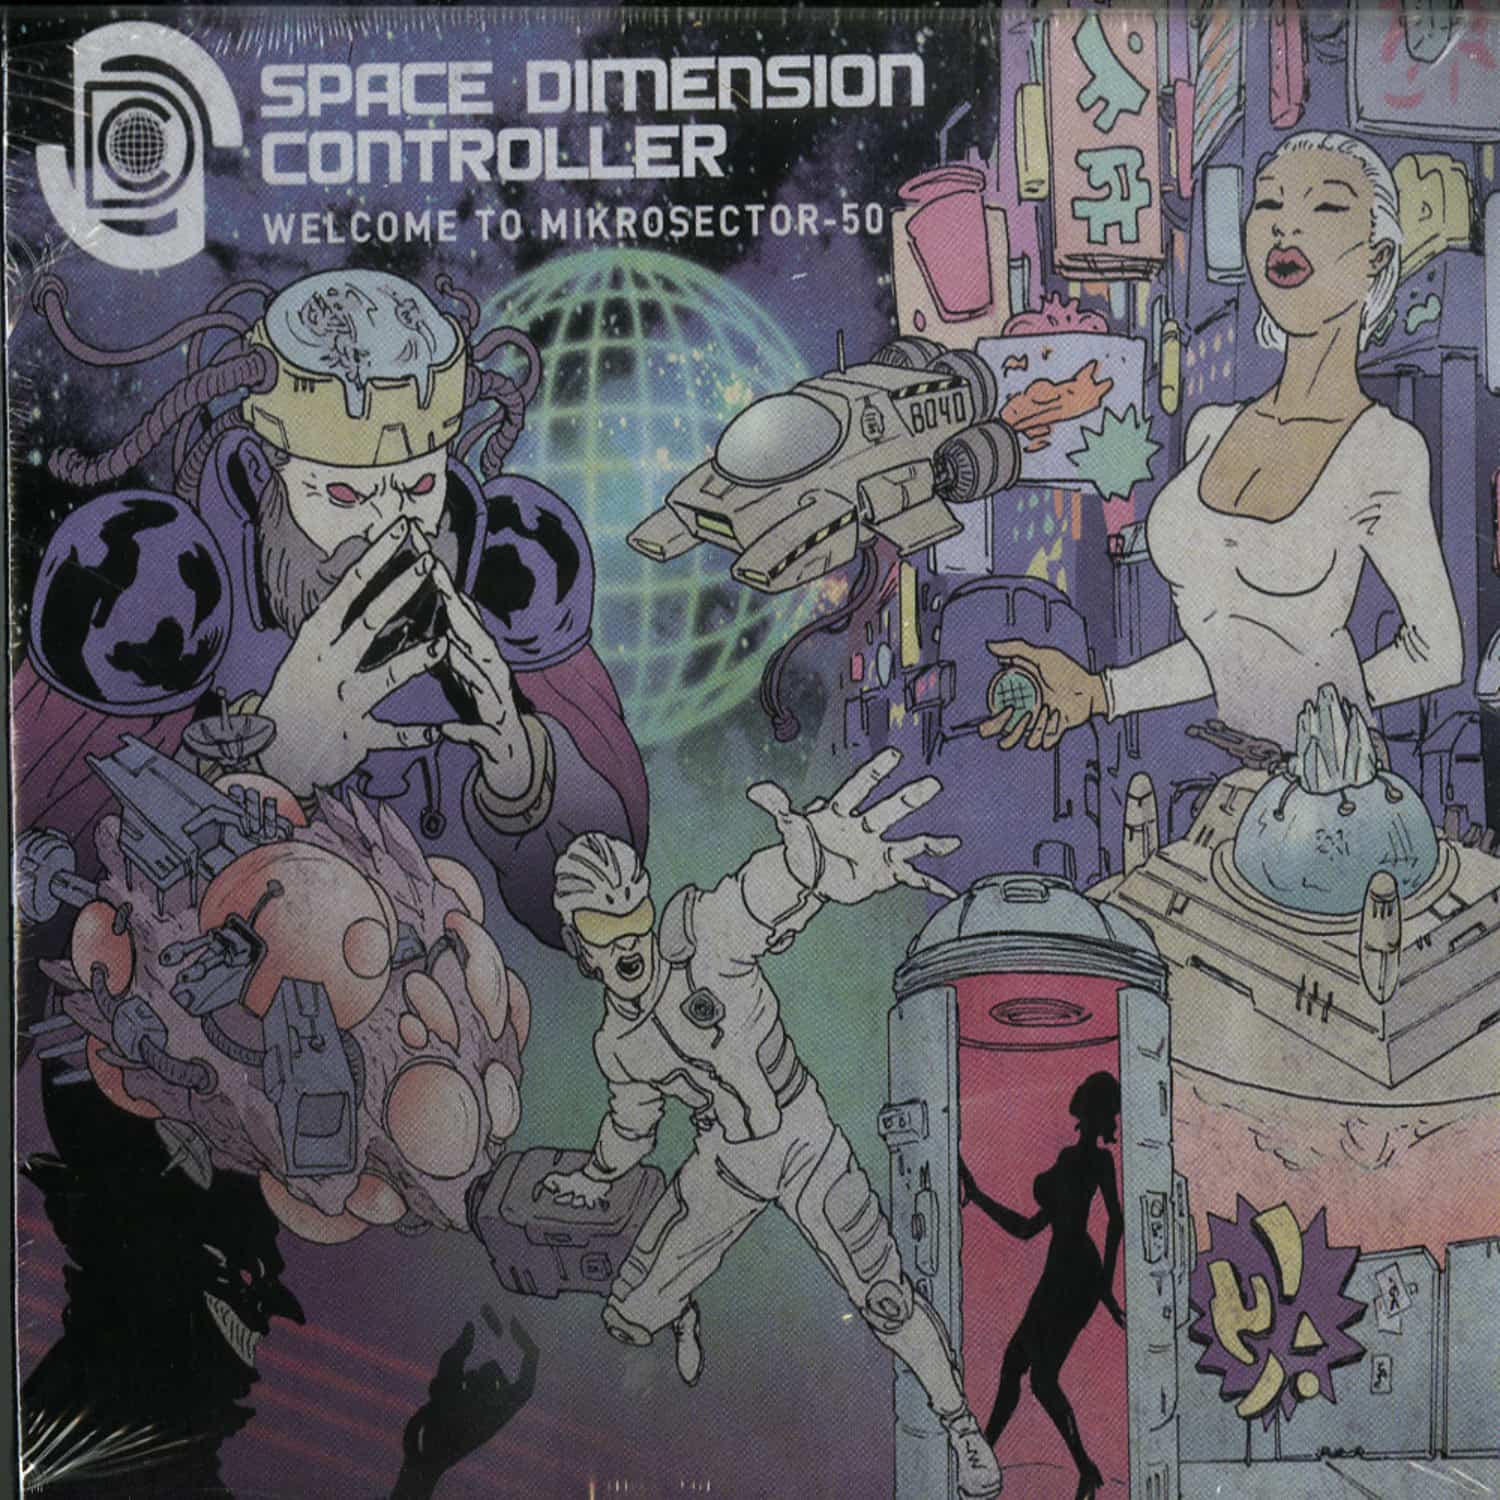 Space Dimension - WELCOME TO MIKROSECTOR-50 